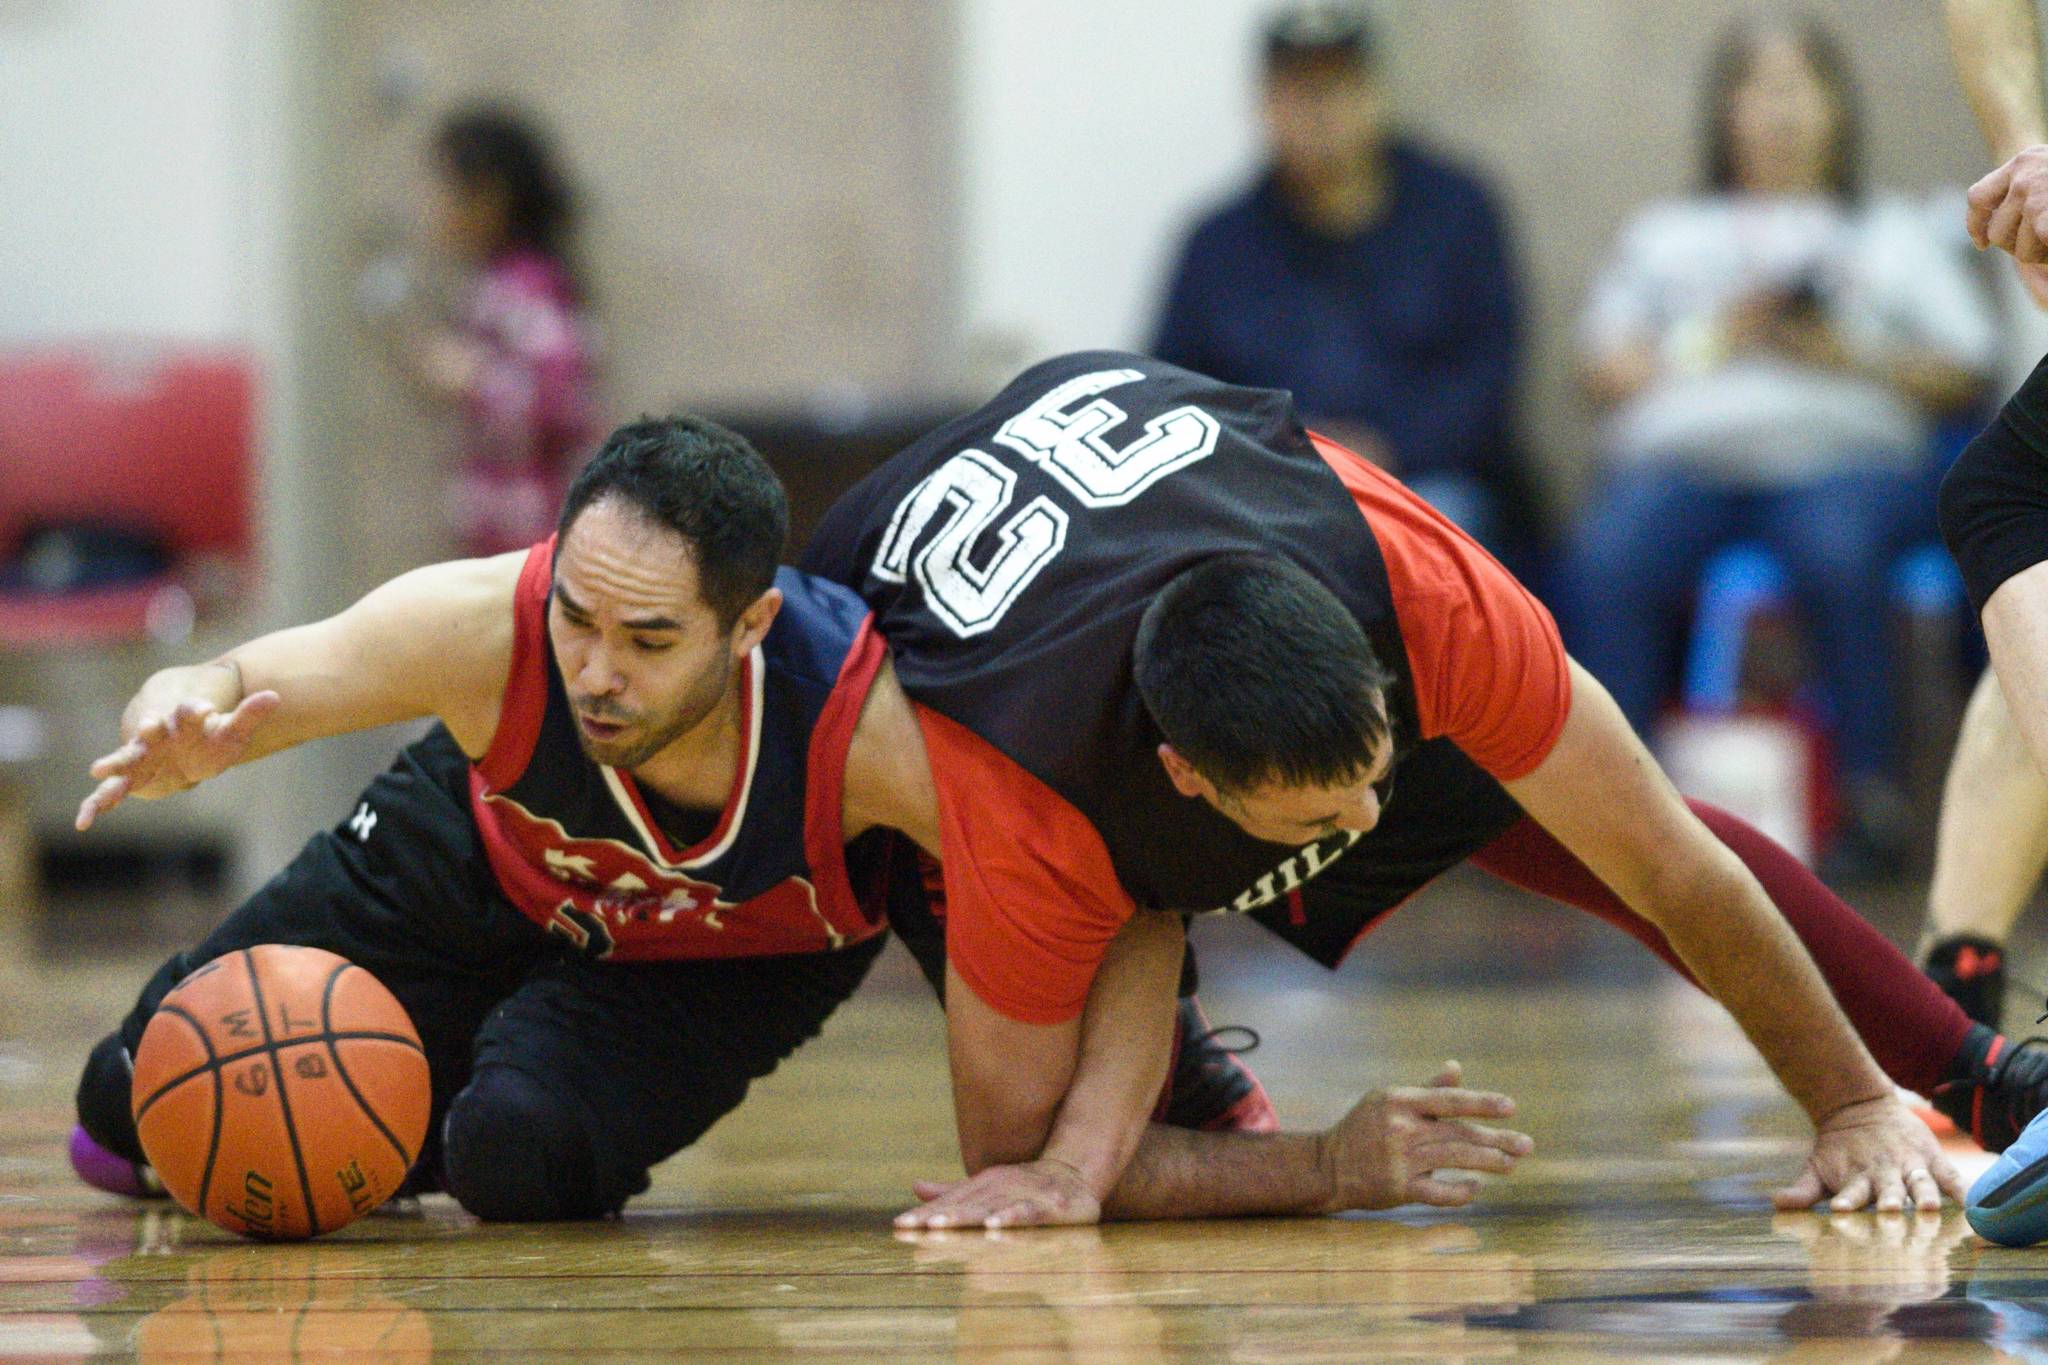 Kake’s Rudy Bean left, tangles with Klukwan’s Neil Erickson in the Masters final at the Gold Medal Basketball Tournament on Saturday, March 23, 2019. (Michael Penn | Juneau Empire)